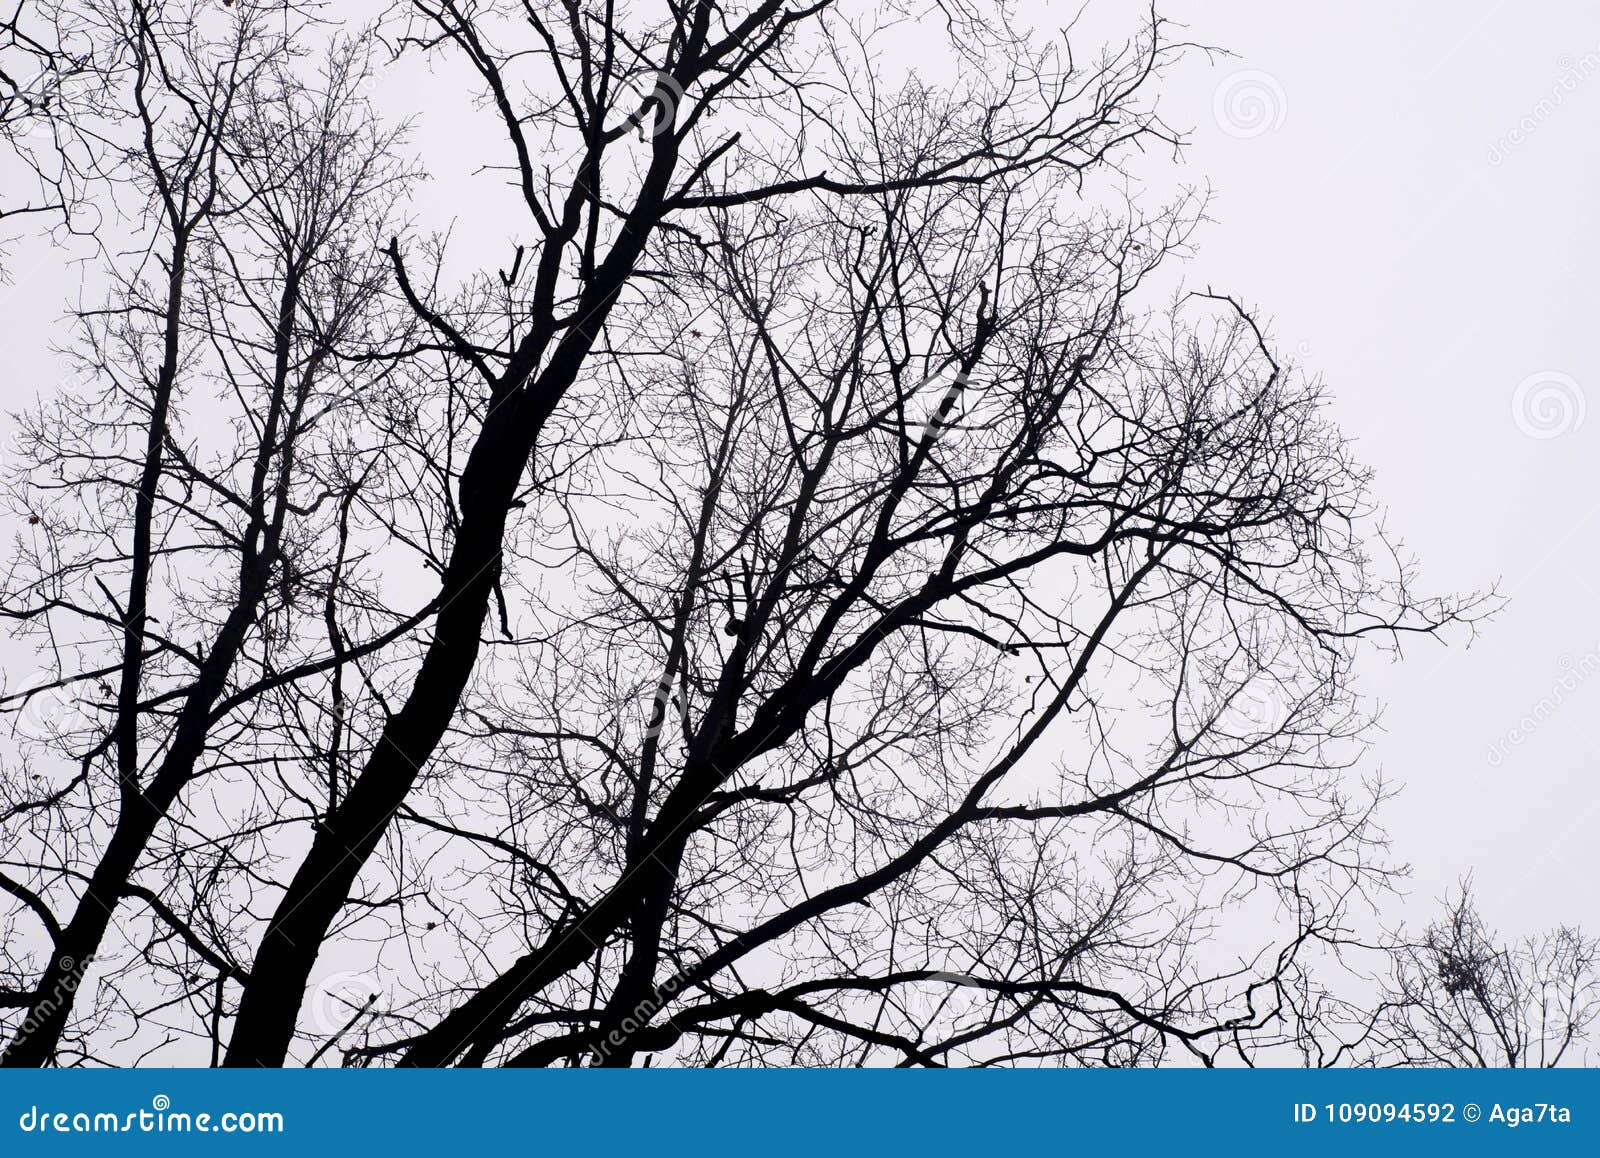 Barren Tree Branches Against Sky on Foggy Morning Stock Photo - Image